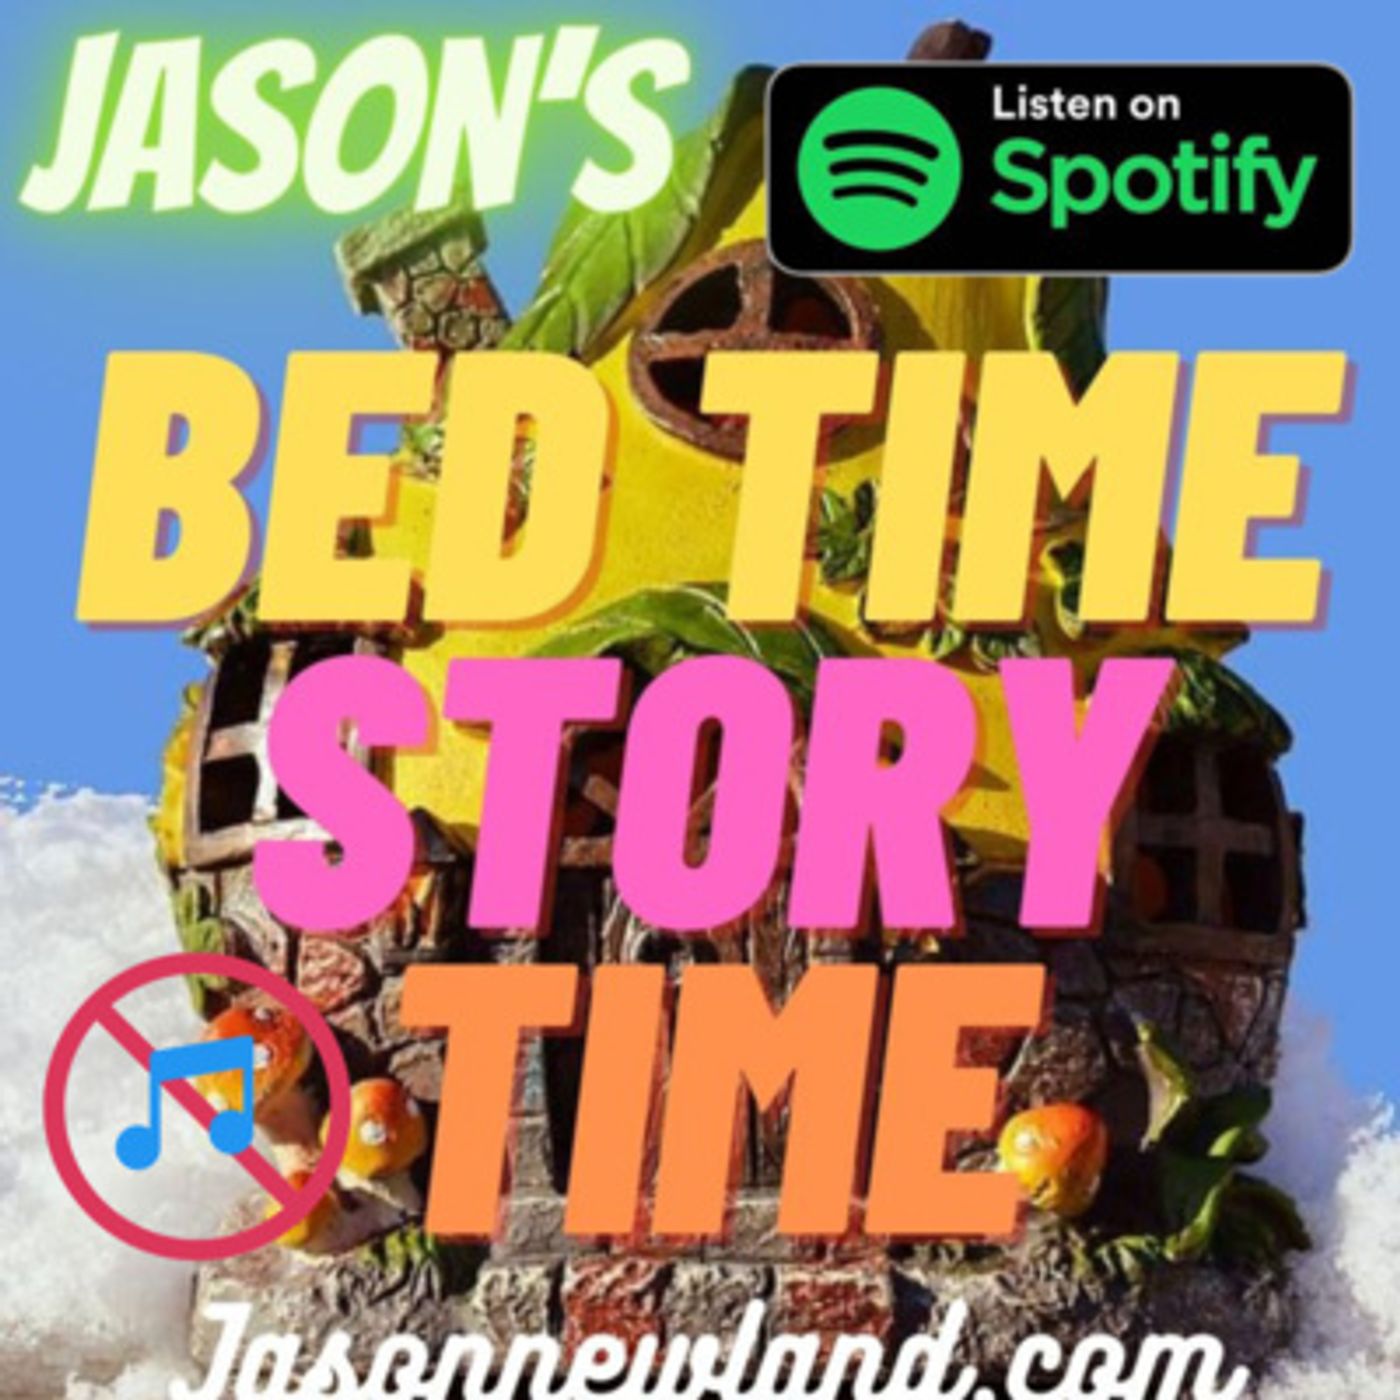 #3 HUMPY TRUMPER - Jasons Bed Time Story Time